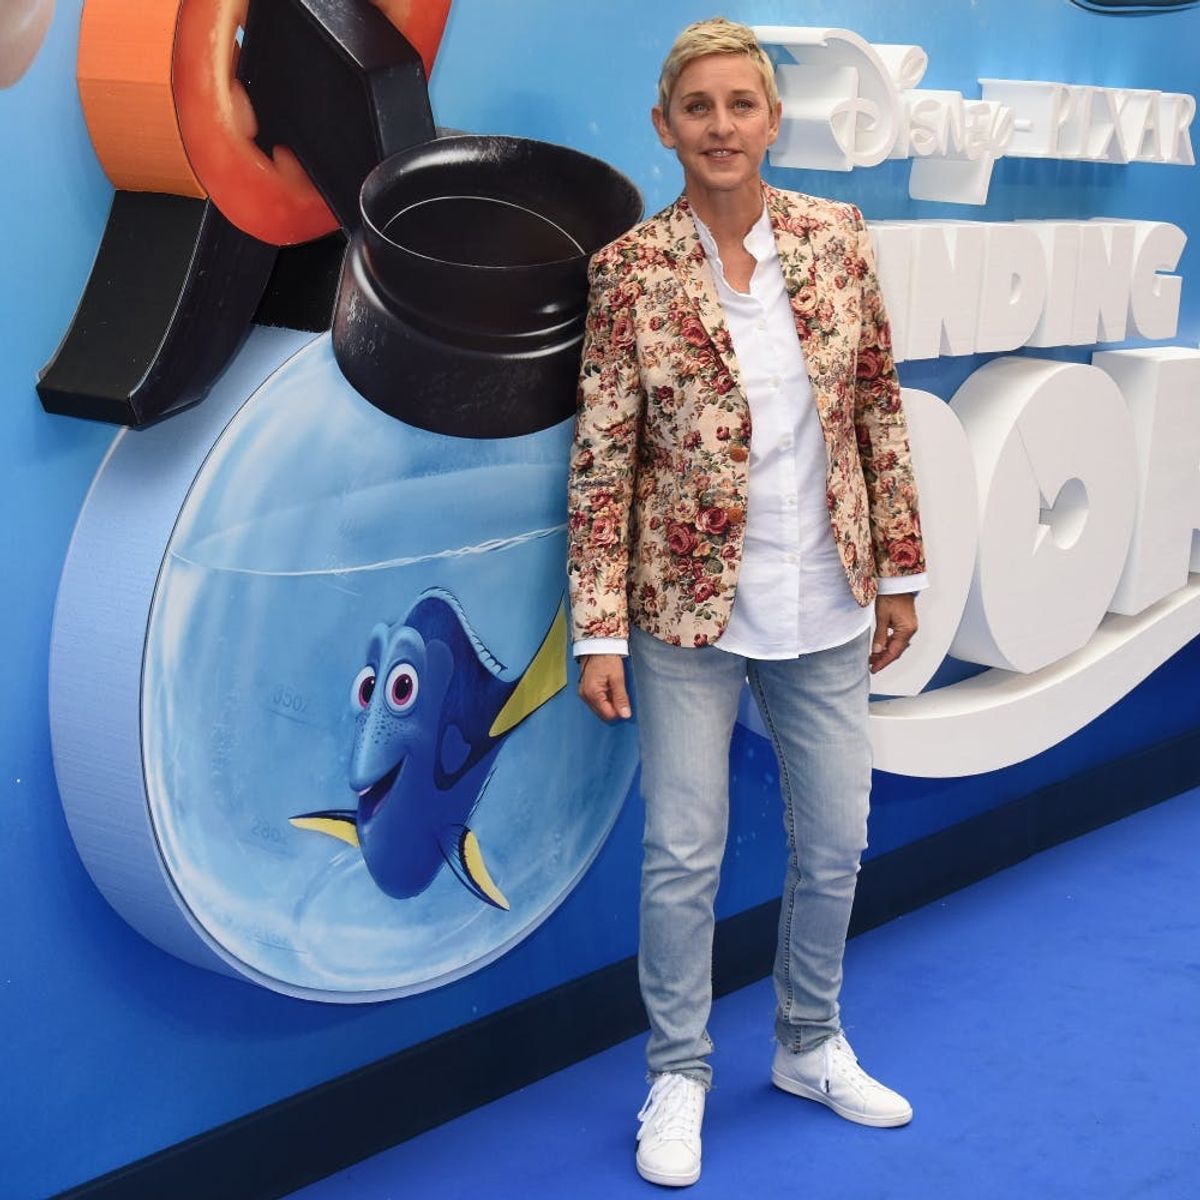 Ellen DeGeneres Uses Finding Dory to Explain Why the Muslim Ban Is Wrong